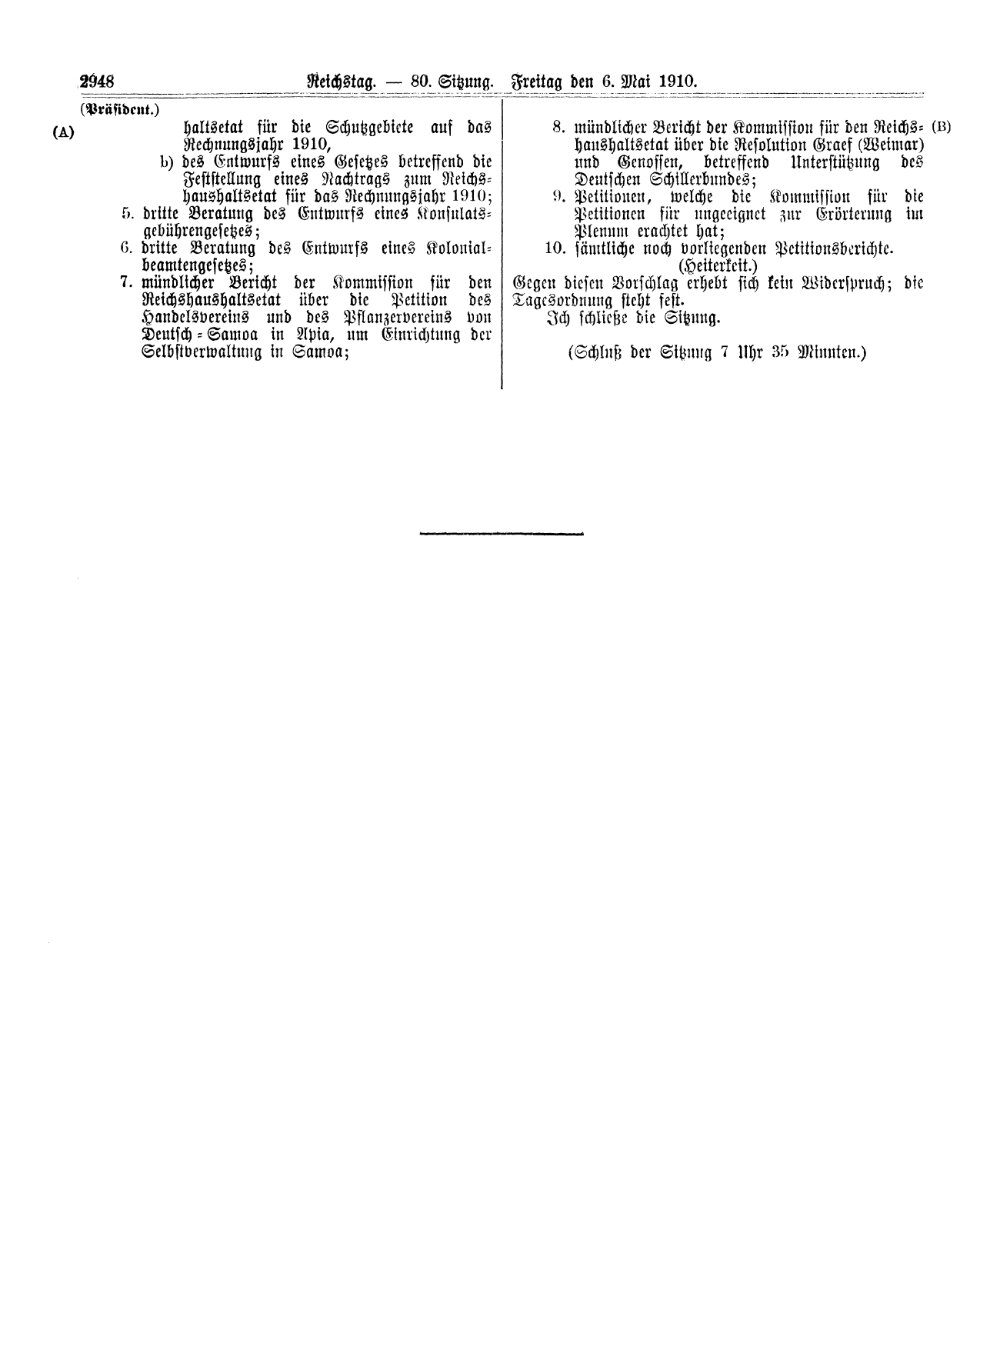 Scan of page 2948